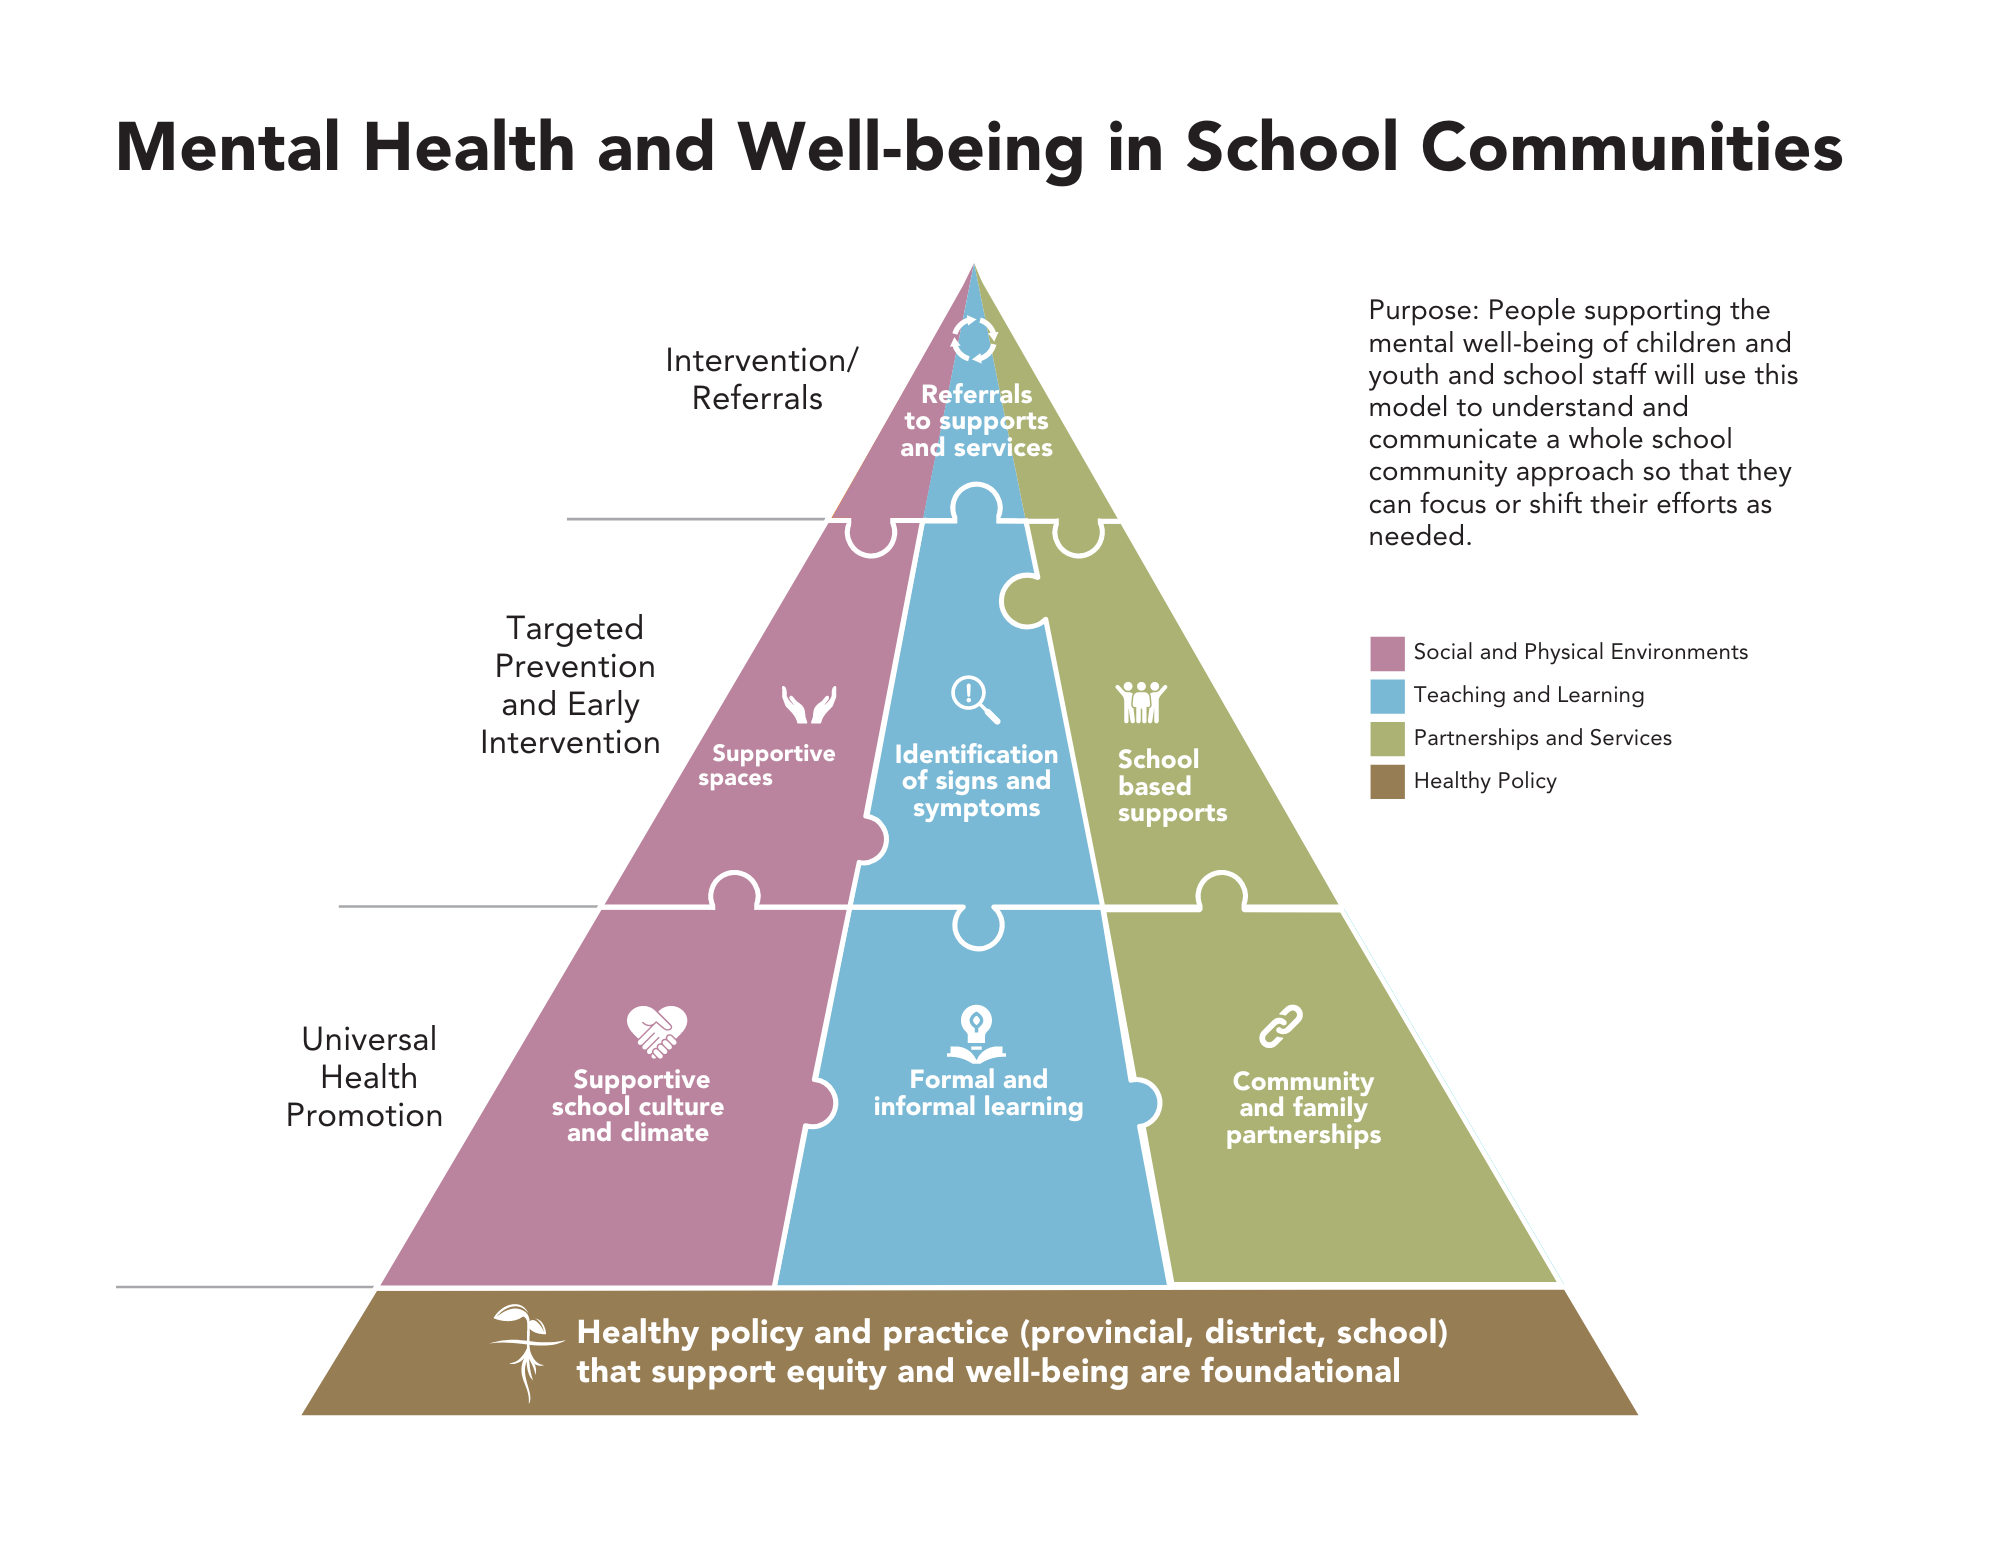 Mental Health & Well-being in Schools: A Model for BC School Communities